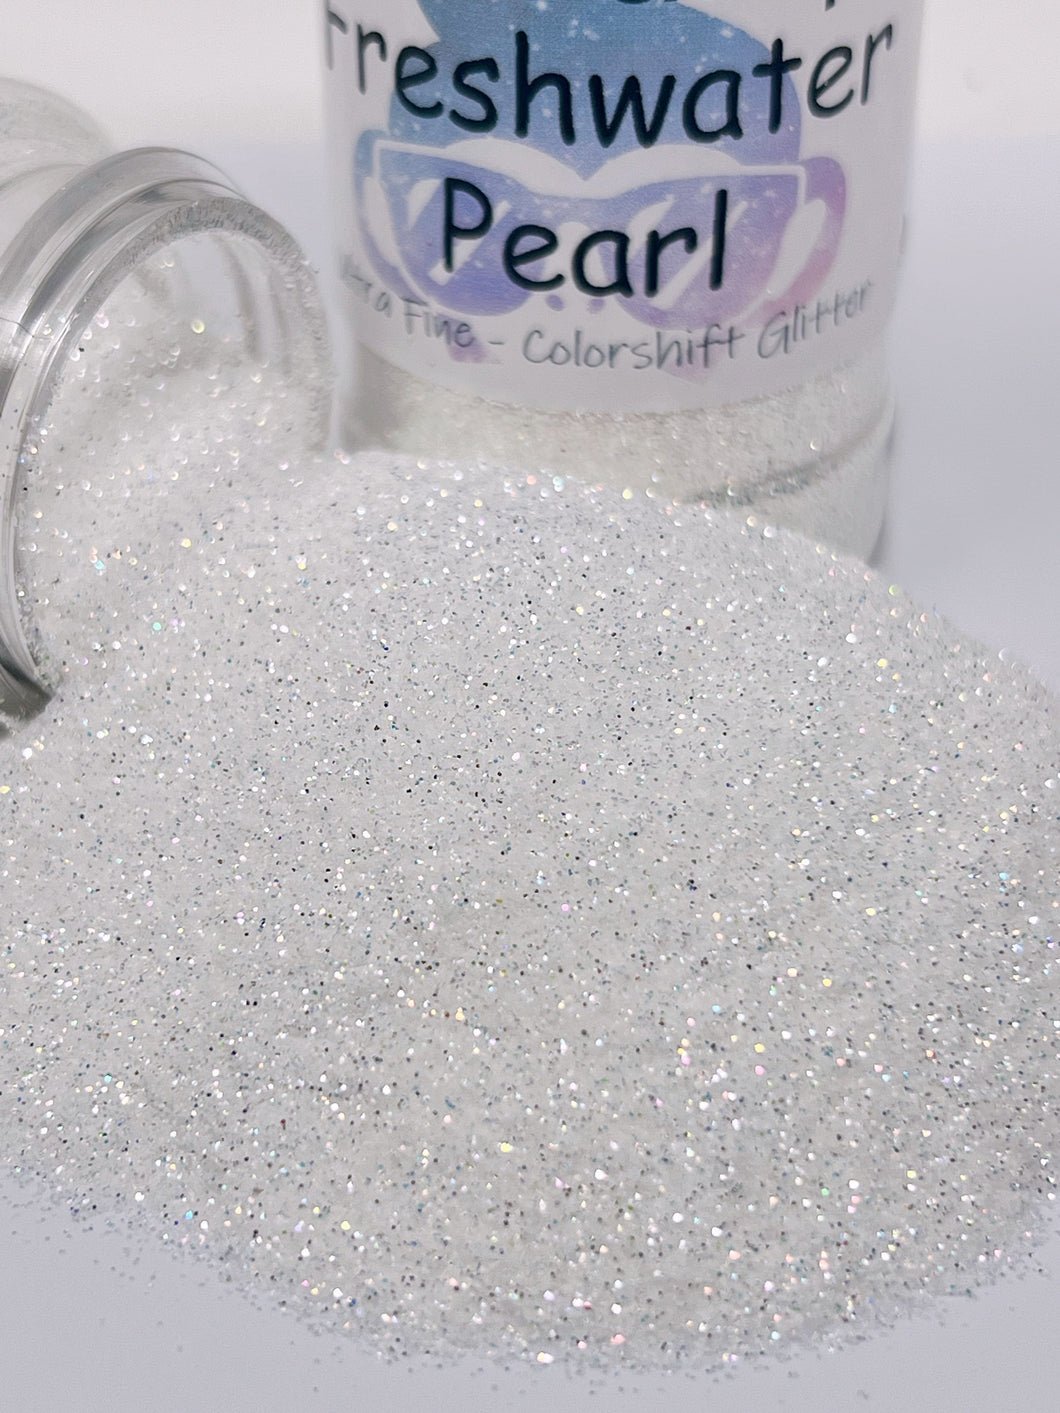 Freshwater Pearl - Ultra Fine Color Shifting Glitter